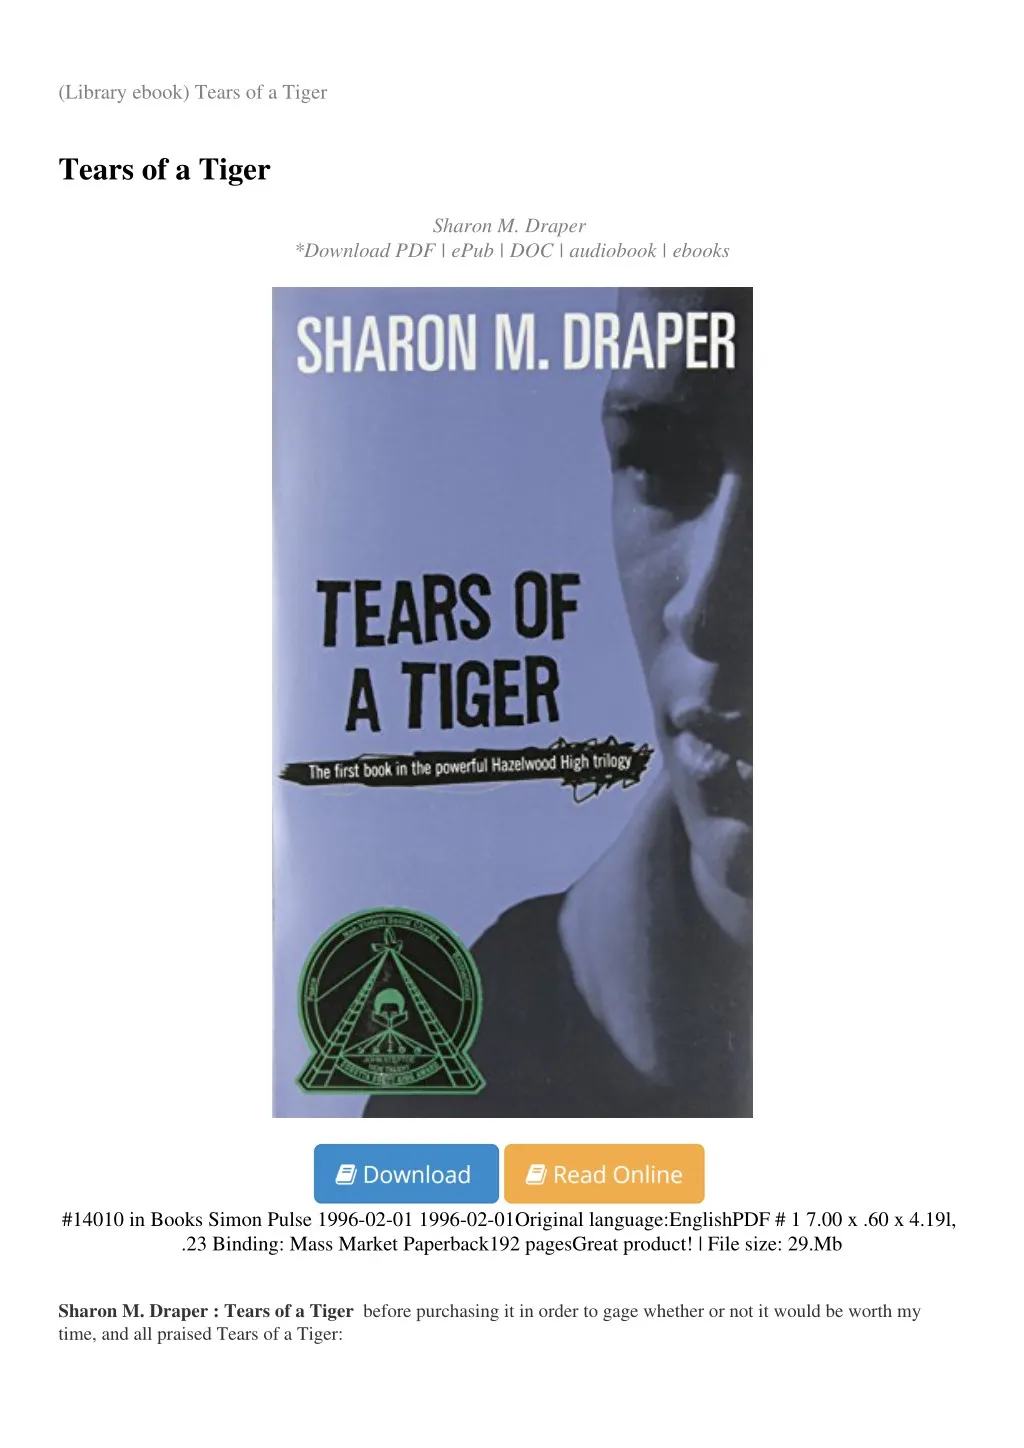 library ebook tears of a tiger